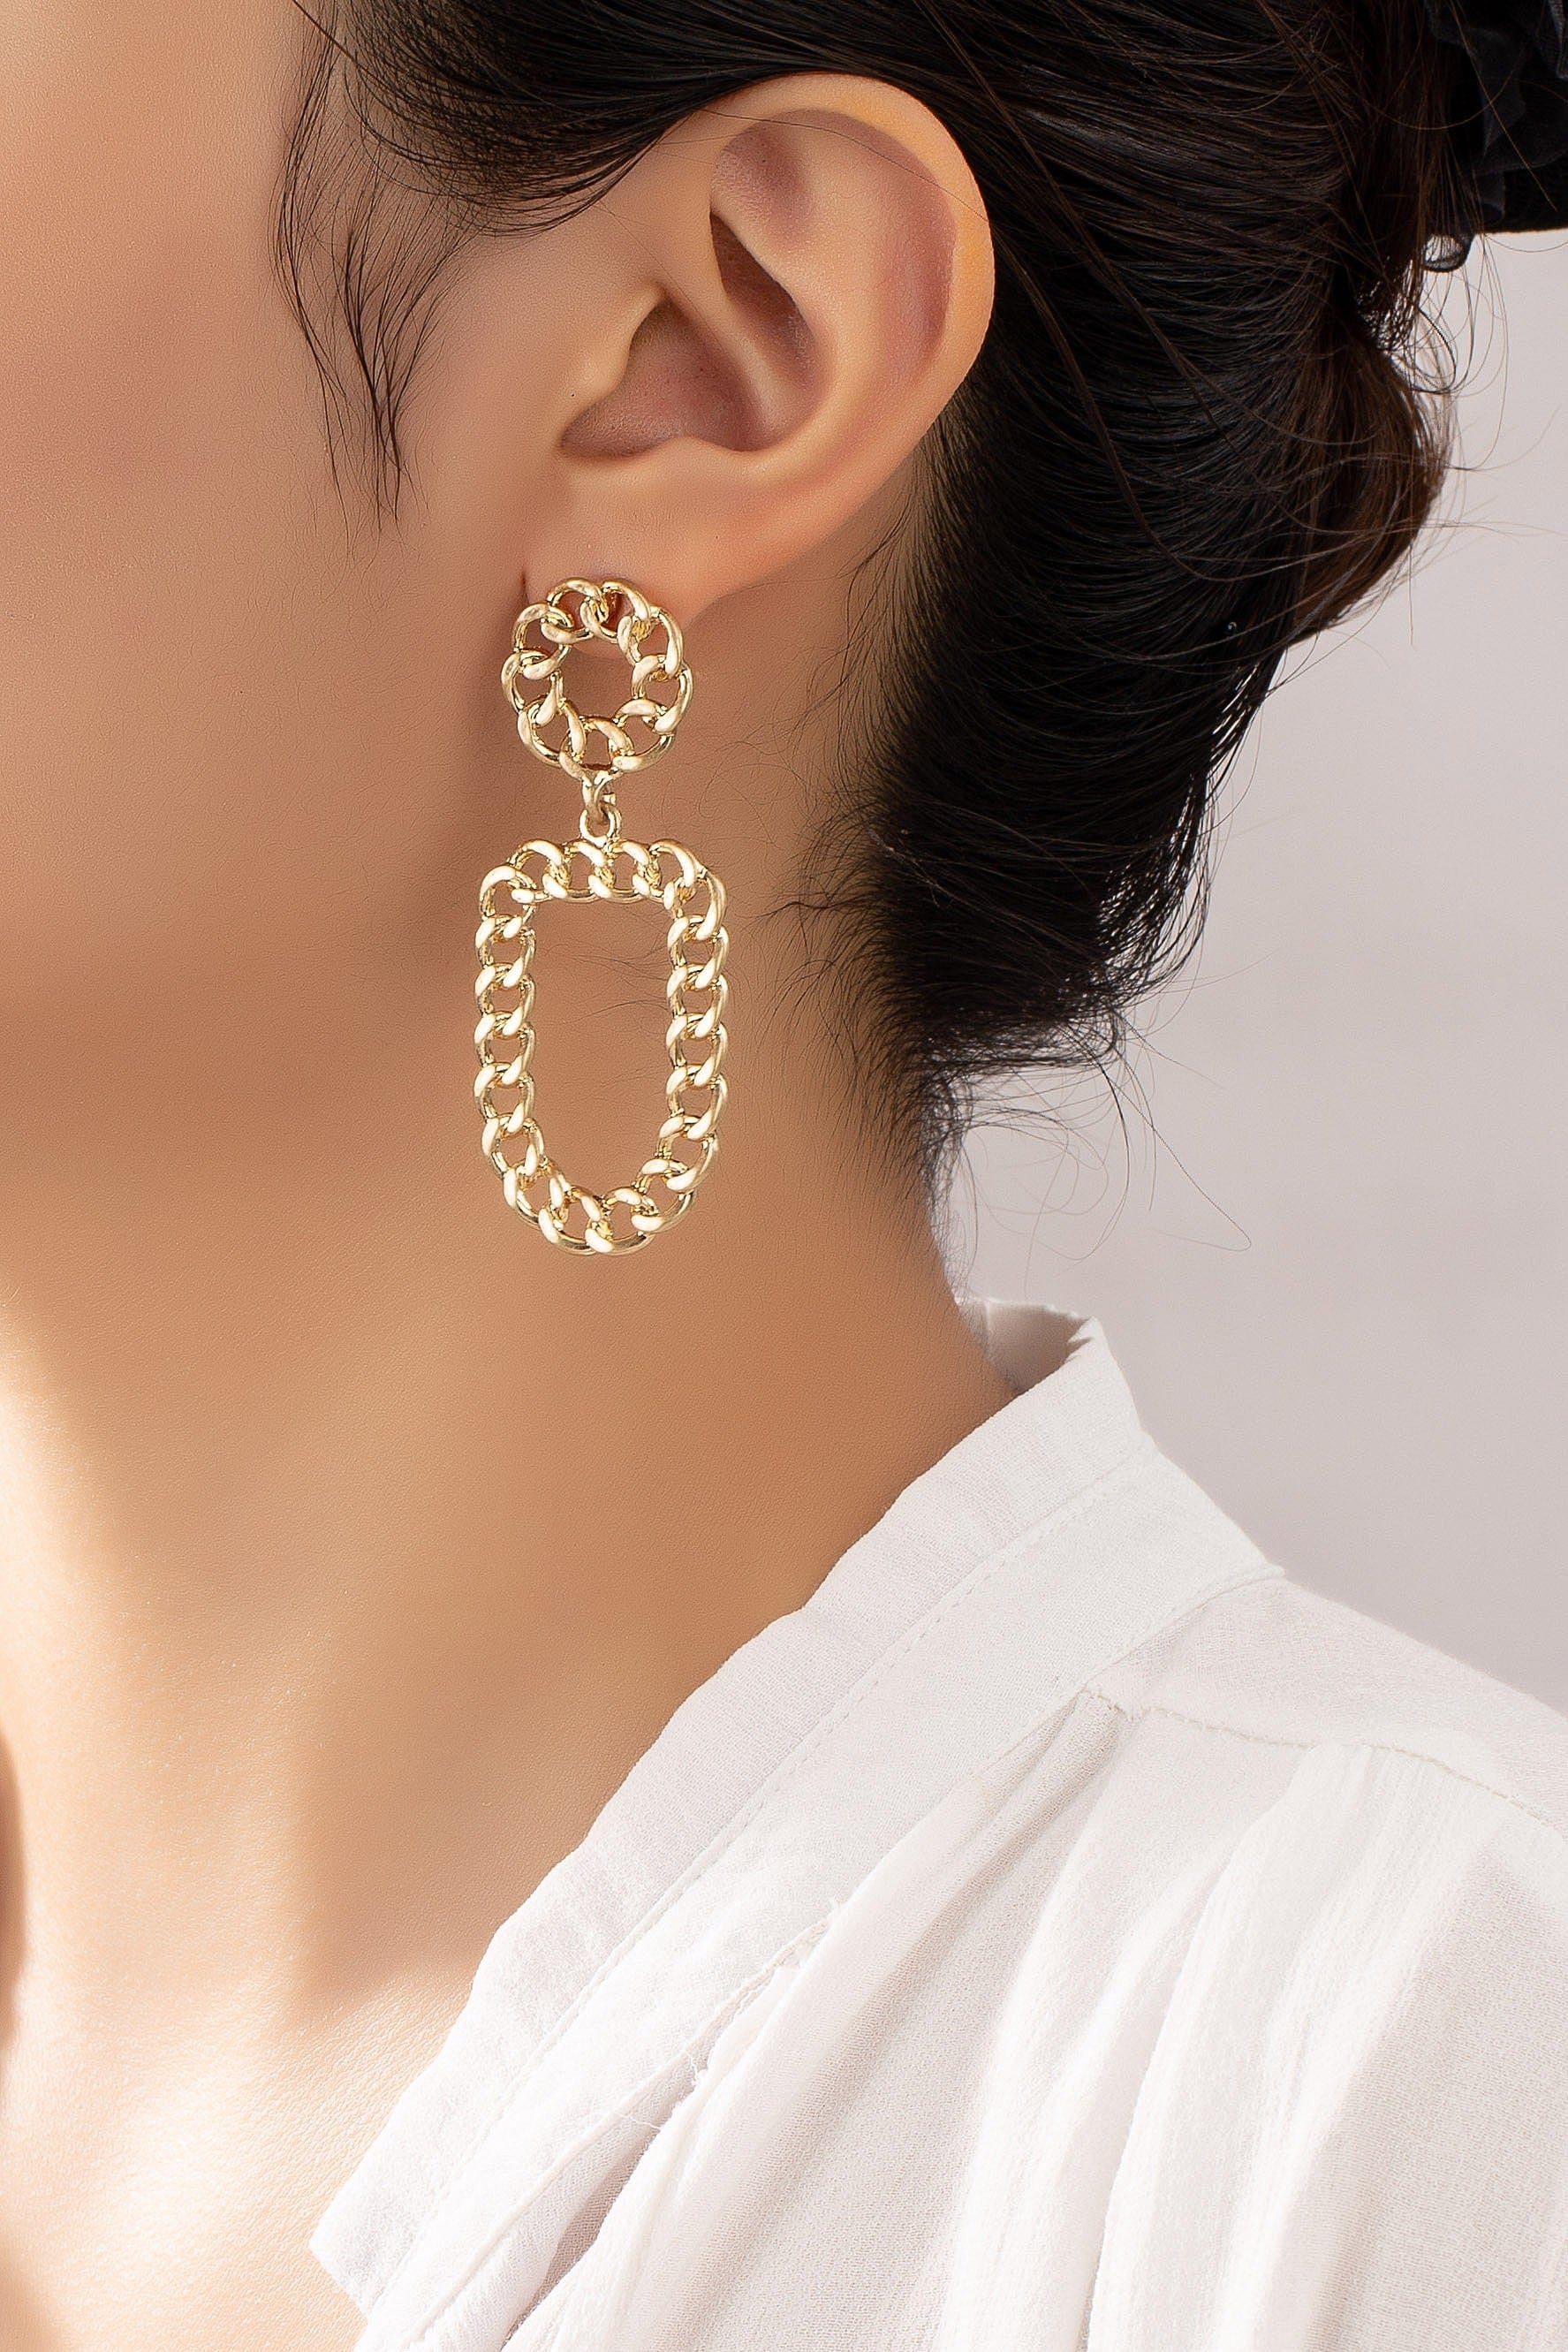 LA3accessories Jewelry - Earrings Curb Chain Round And Oval Hoop Earring In Gold 17481718